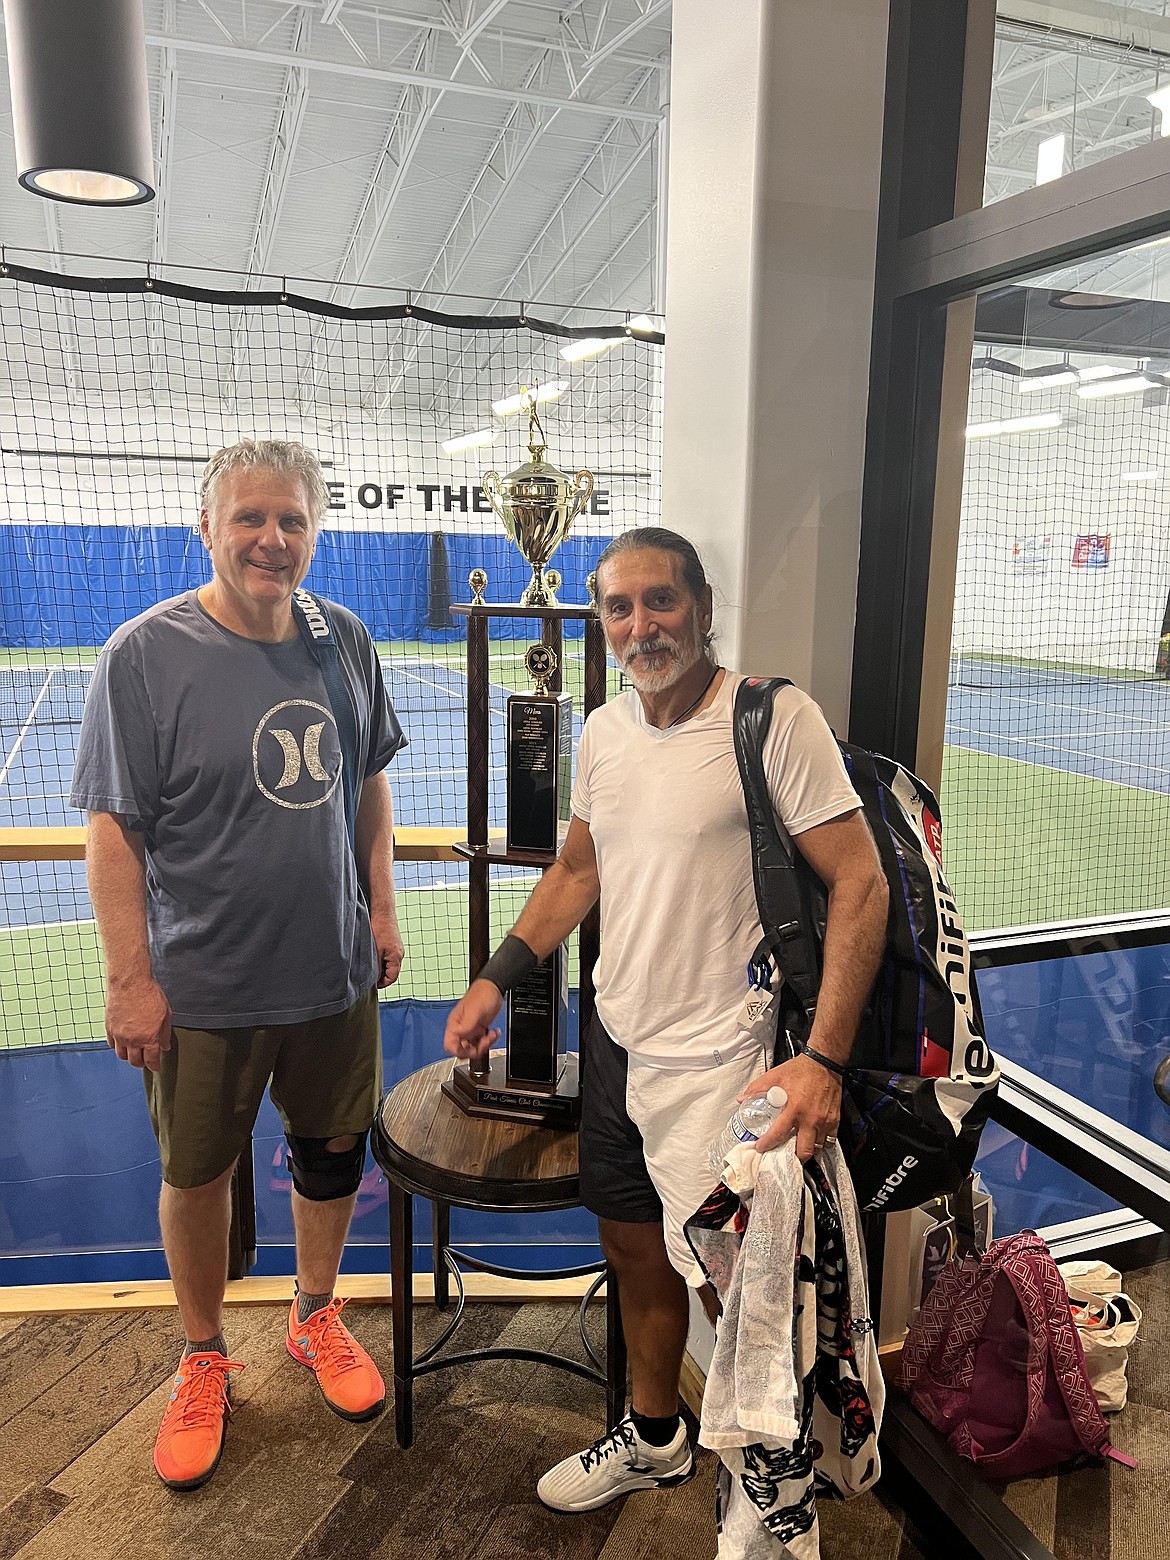 Courtesy photo
The men's 4.0 doubles champions at the recent Peak Hayden member tennis tournament were, from left, Paul Bernard and Eric Seaman, who defeated Allen Levesque and Jerry Miller 6-4, 6-4.